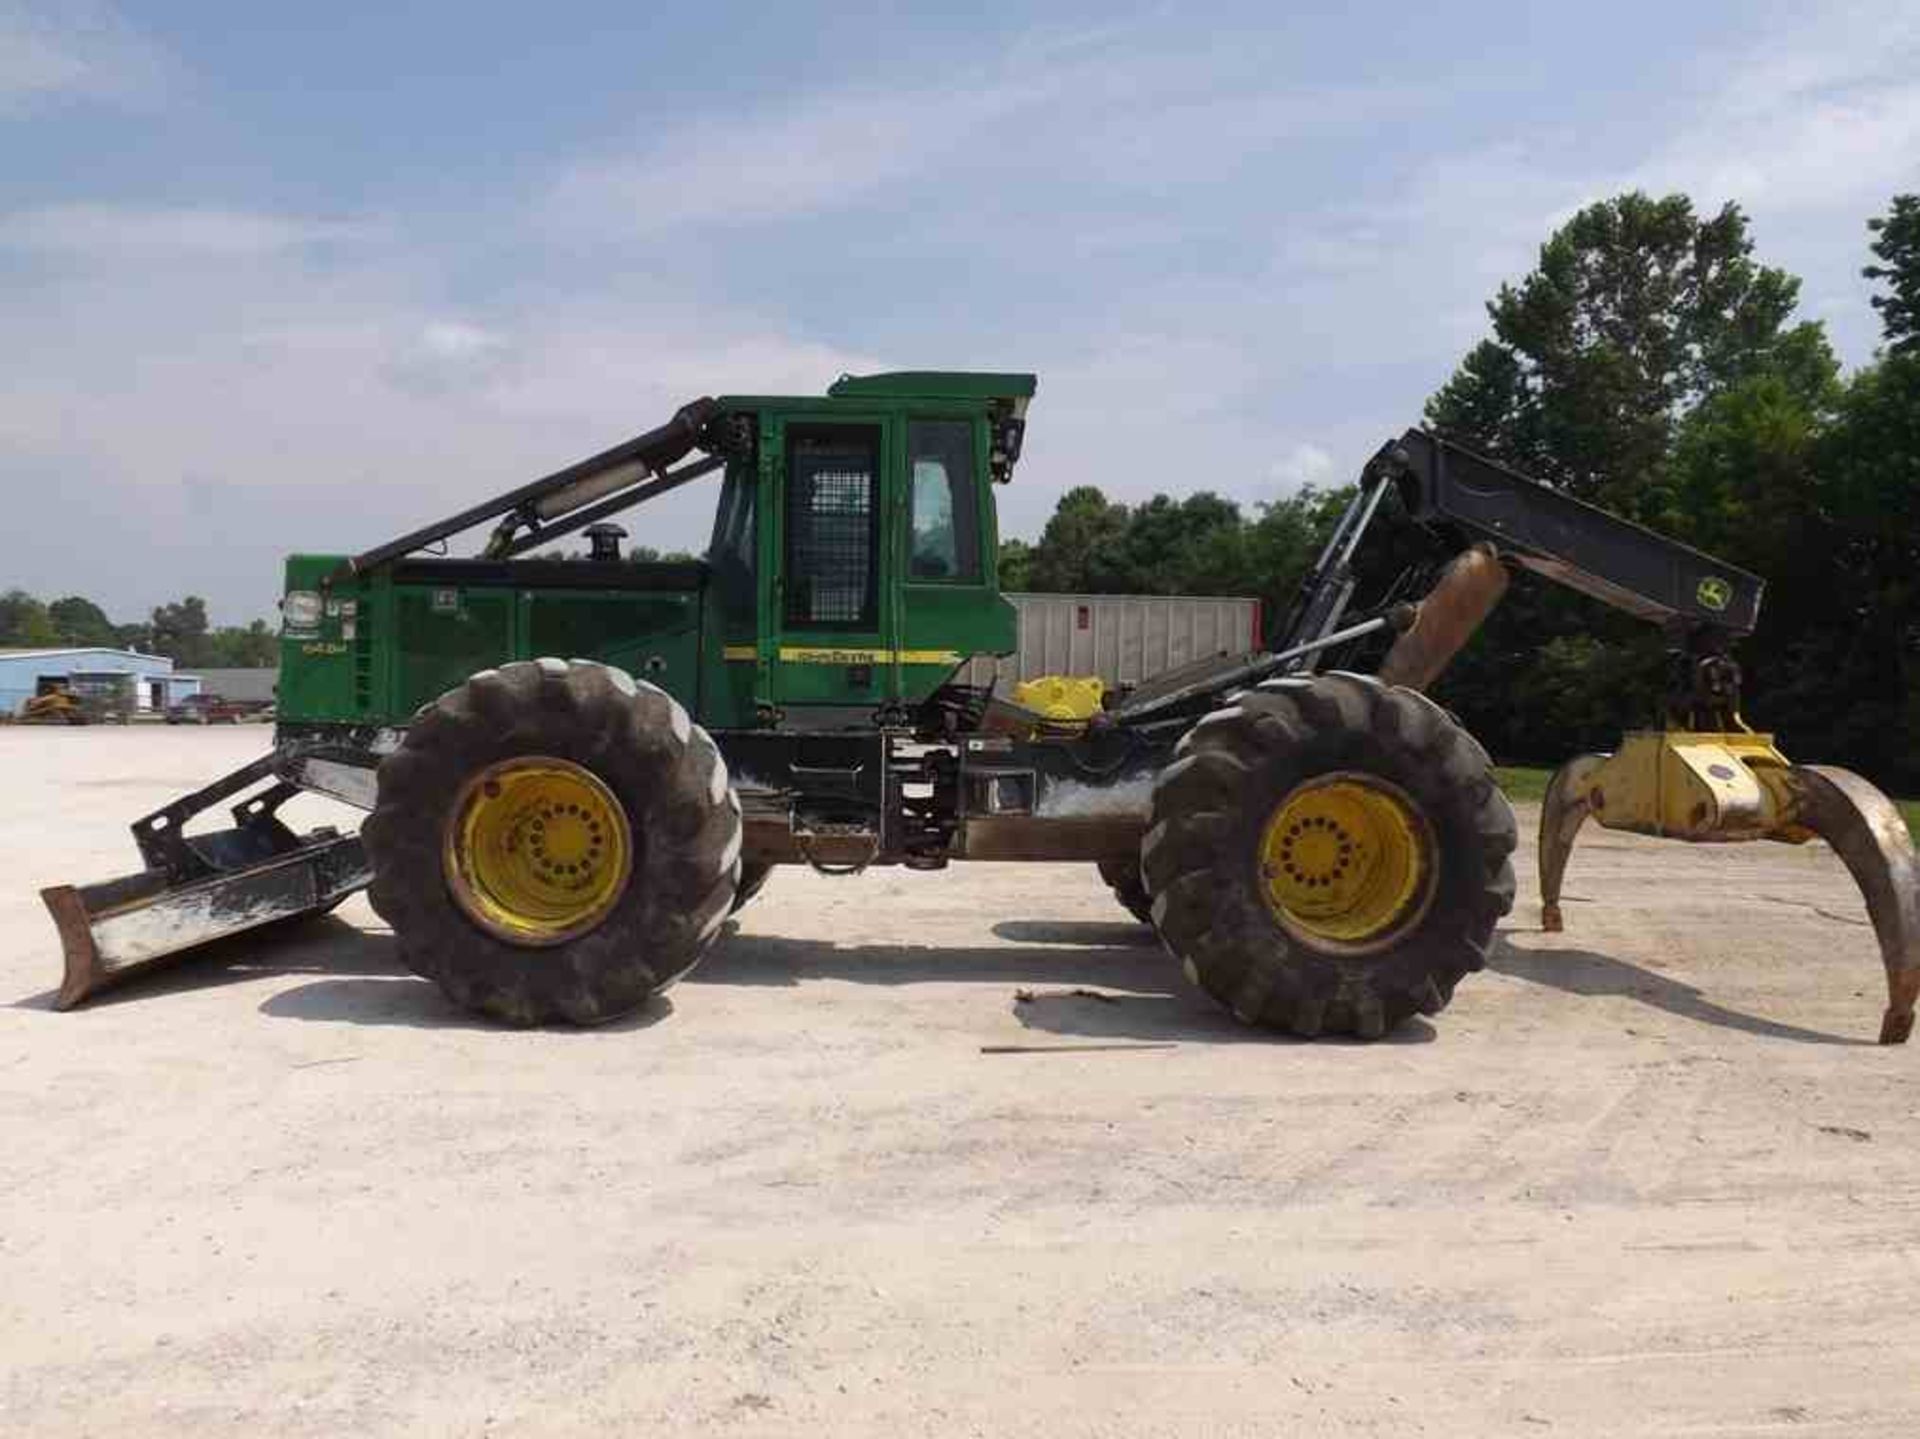 2010 JOHN DEERE 648H DUAL ARCH GRAPPLE SKIDDER W/ENCLOSED CAB WITH HEAT & AIR; W/30.5X32 RUBBER; S/